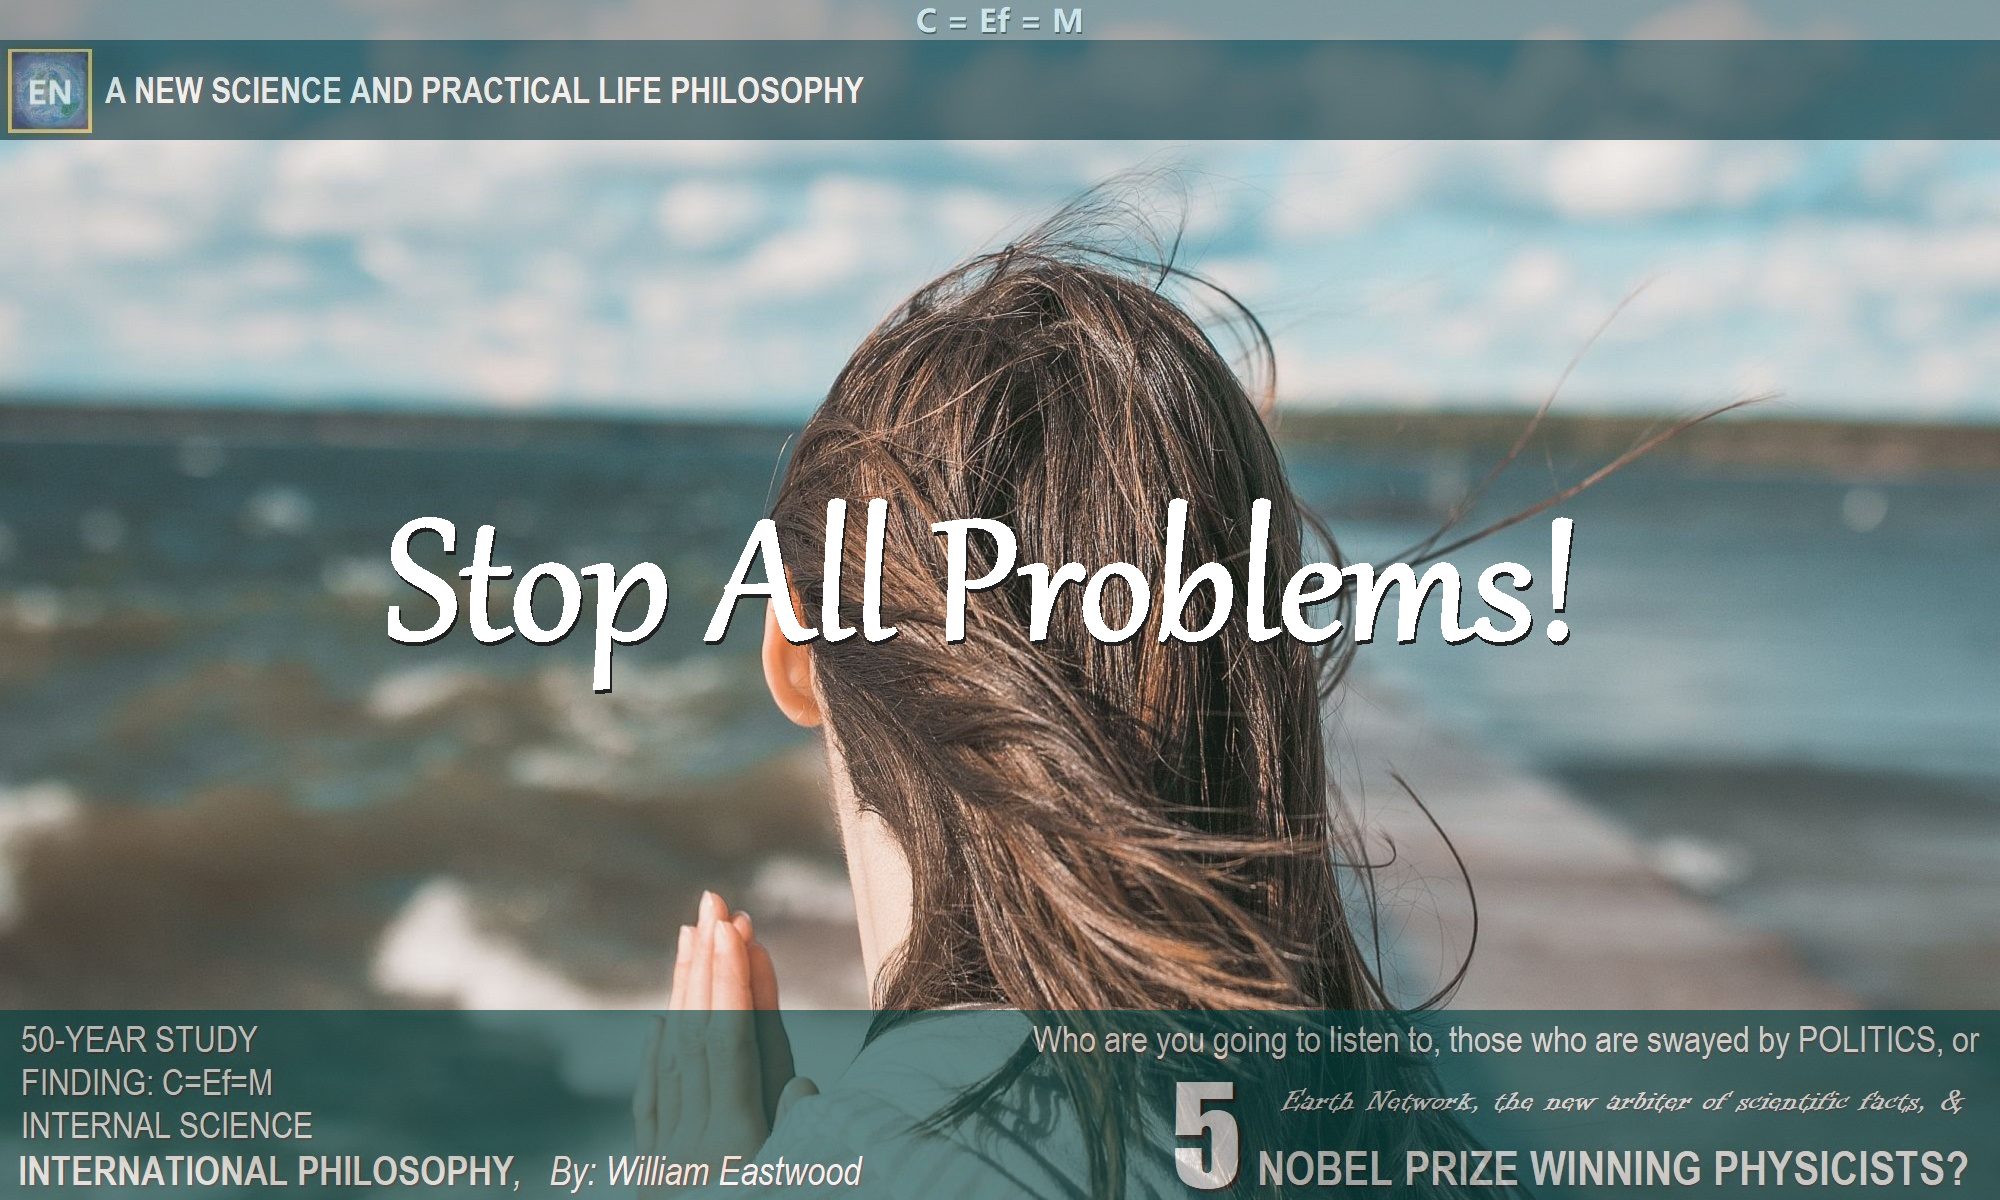 HOW DO I STOP ALL PROBLEMS? How to Get Rid of it all - what I don't want or like